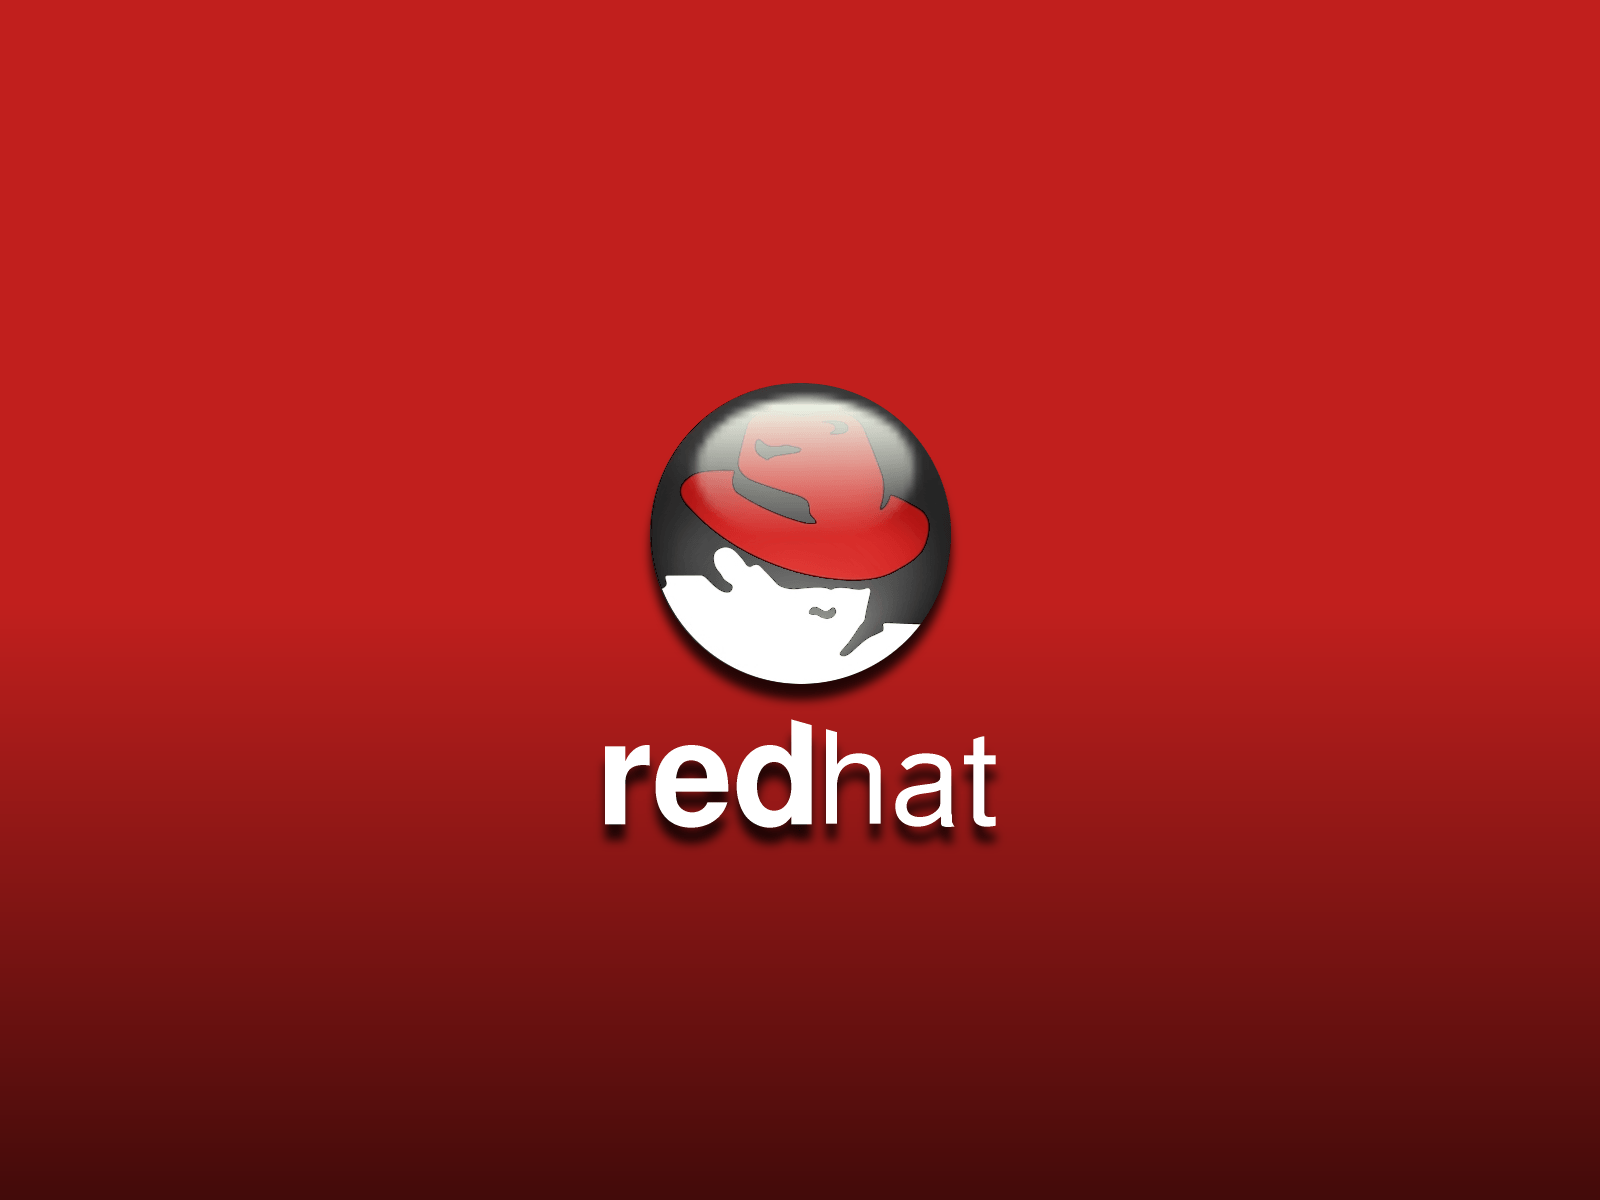 Preview Crystal Redhat Wallpaper